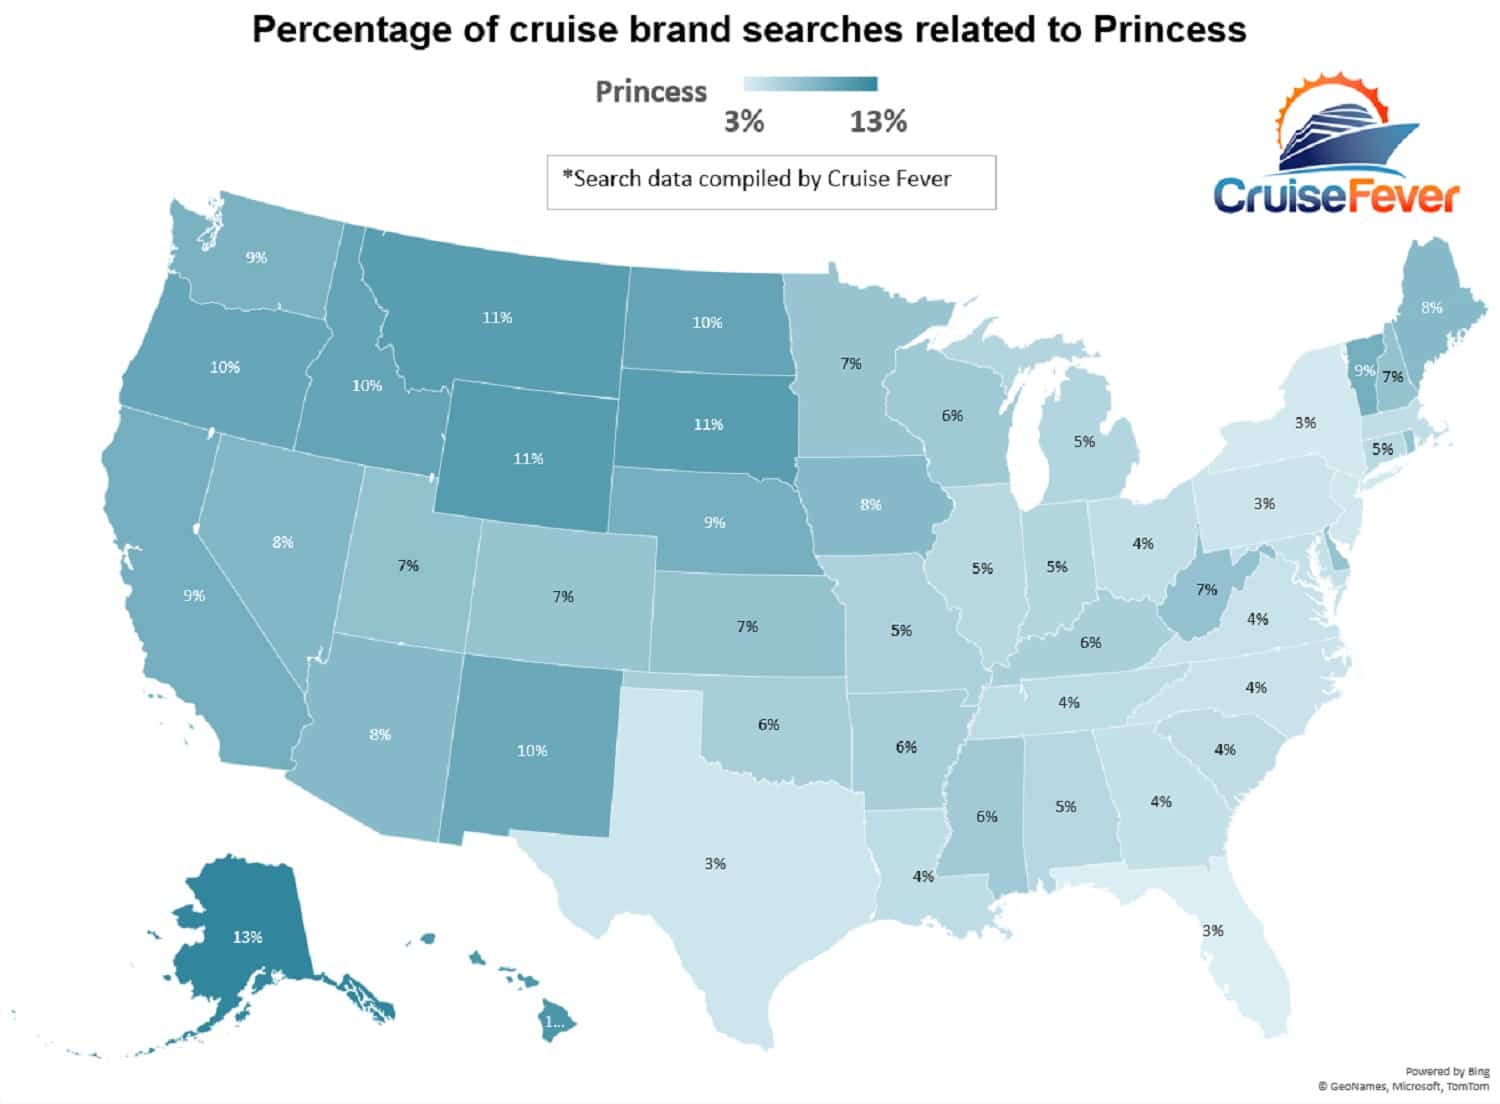 Princess cruise searches shown by percentage on US map